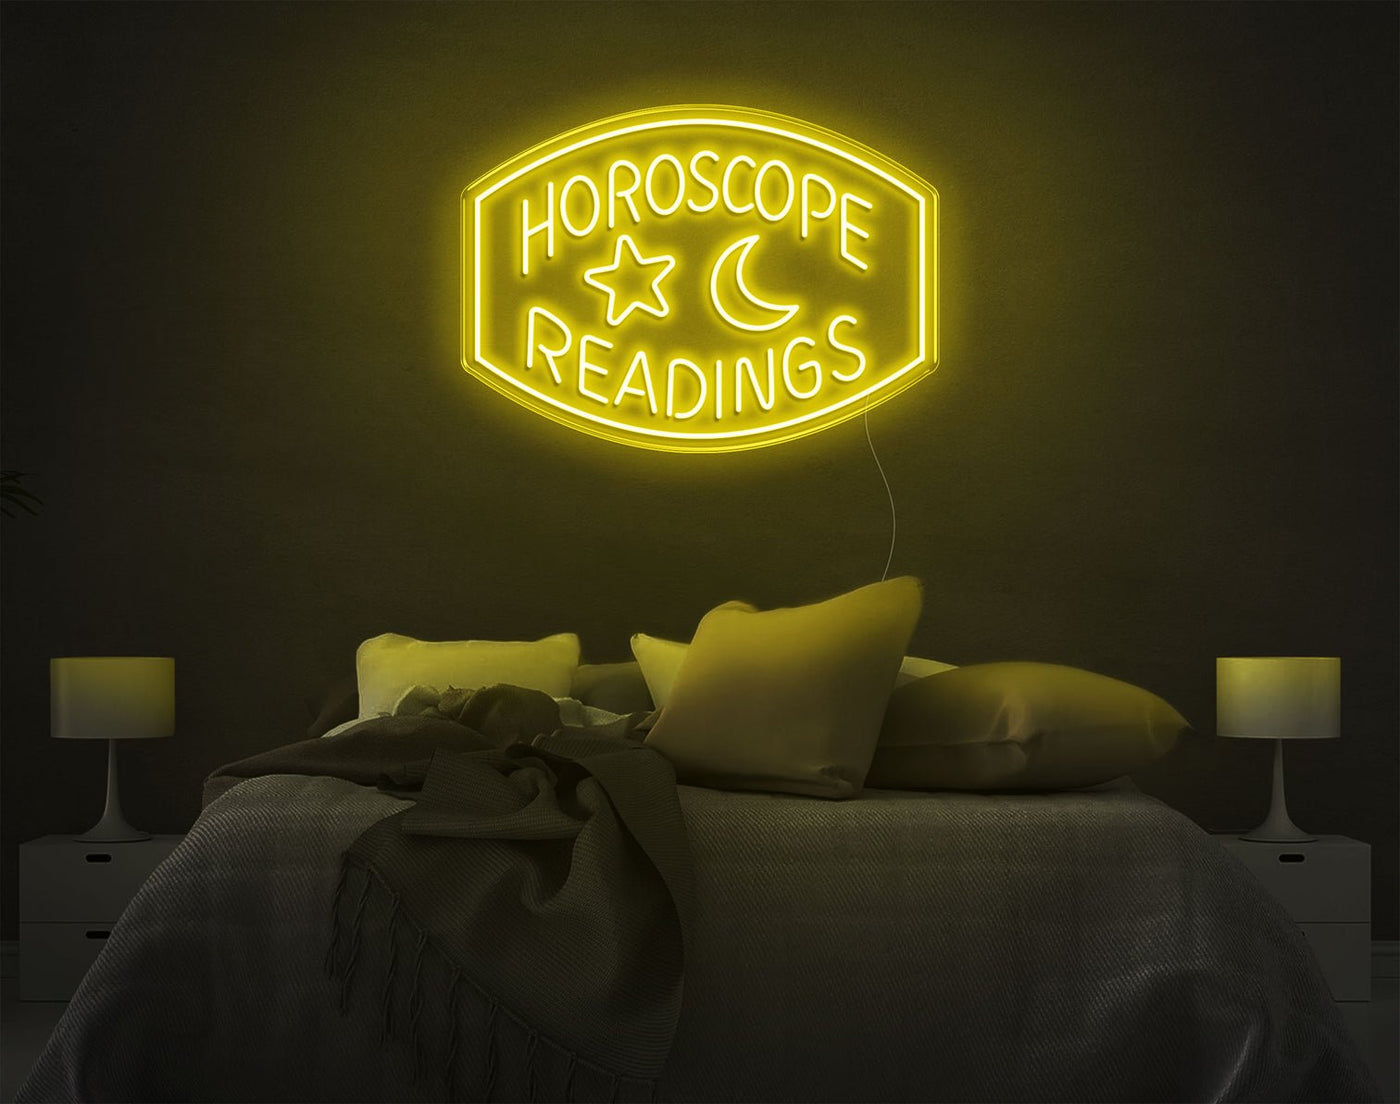 Horoscope Readings LED Neon Sign - 20inch x 28inchHot Pink